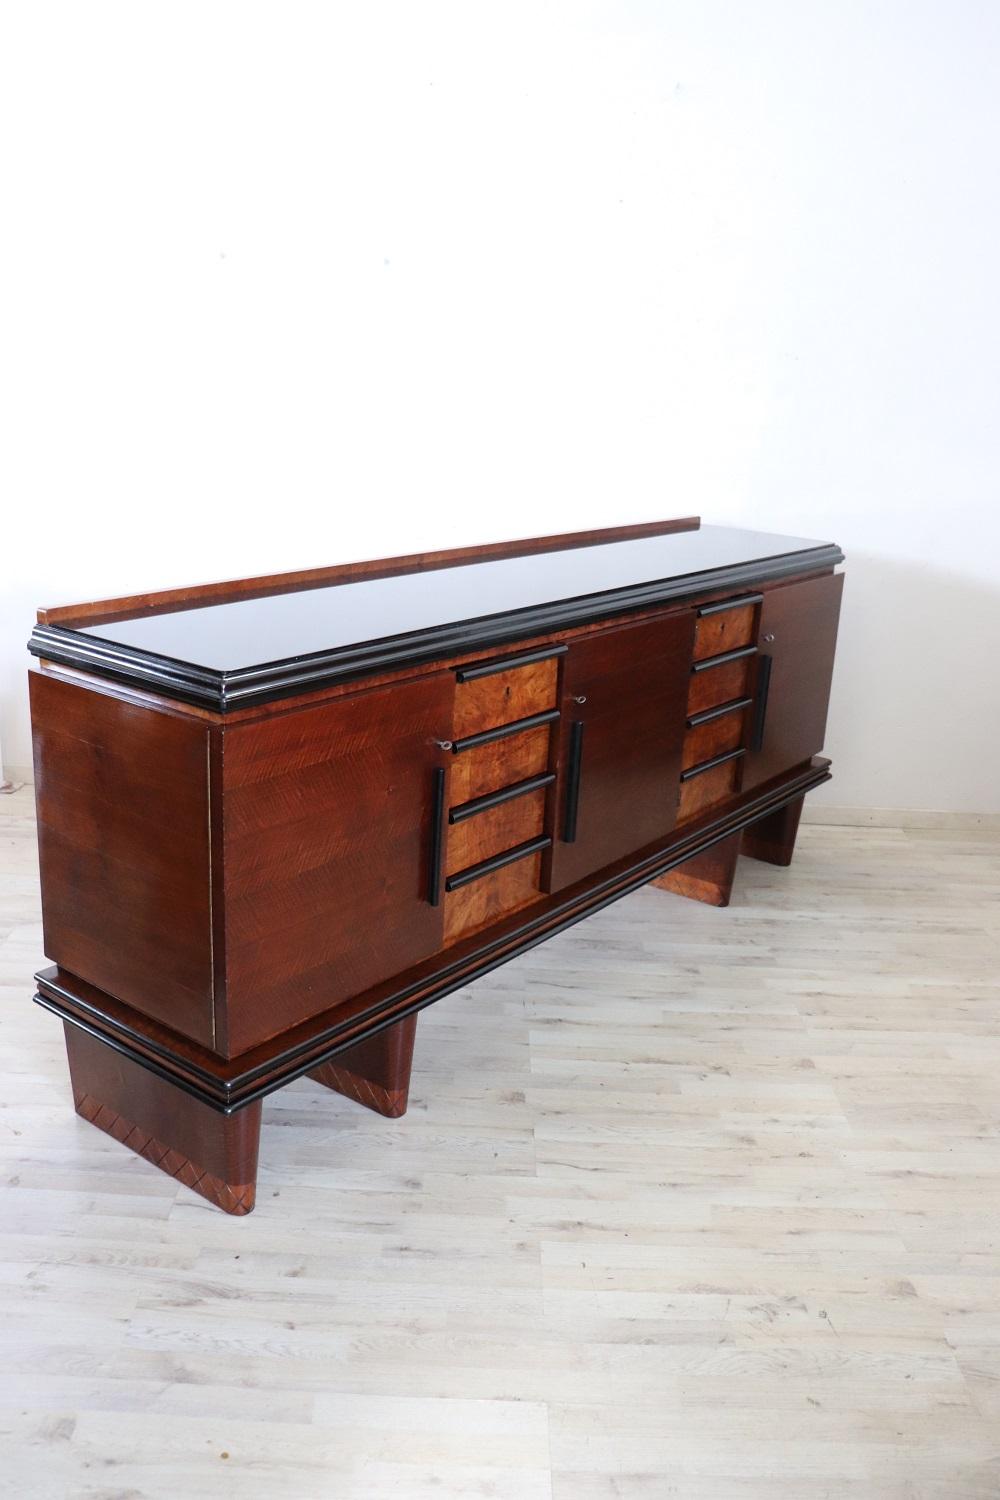 Beautiful and rare long sideboard of the period Art Deco, 1930s. Characterized by an essential and elegant line made of veneered walnut with fine walnut burl decoration on the front and ebonized profiles. The top is in thick black glass. Large